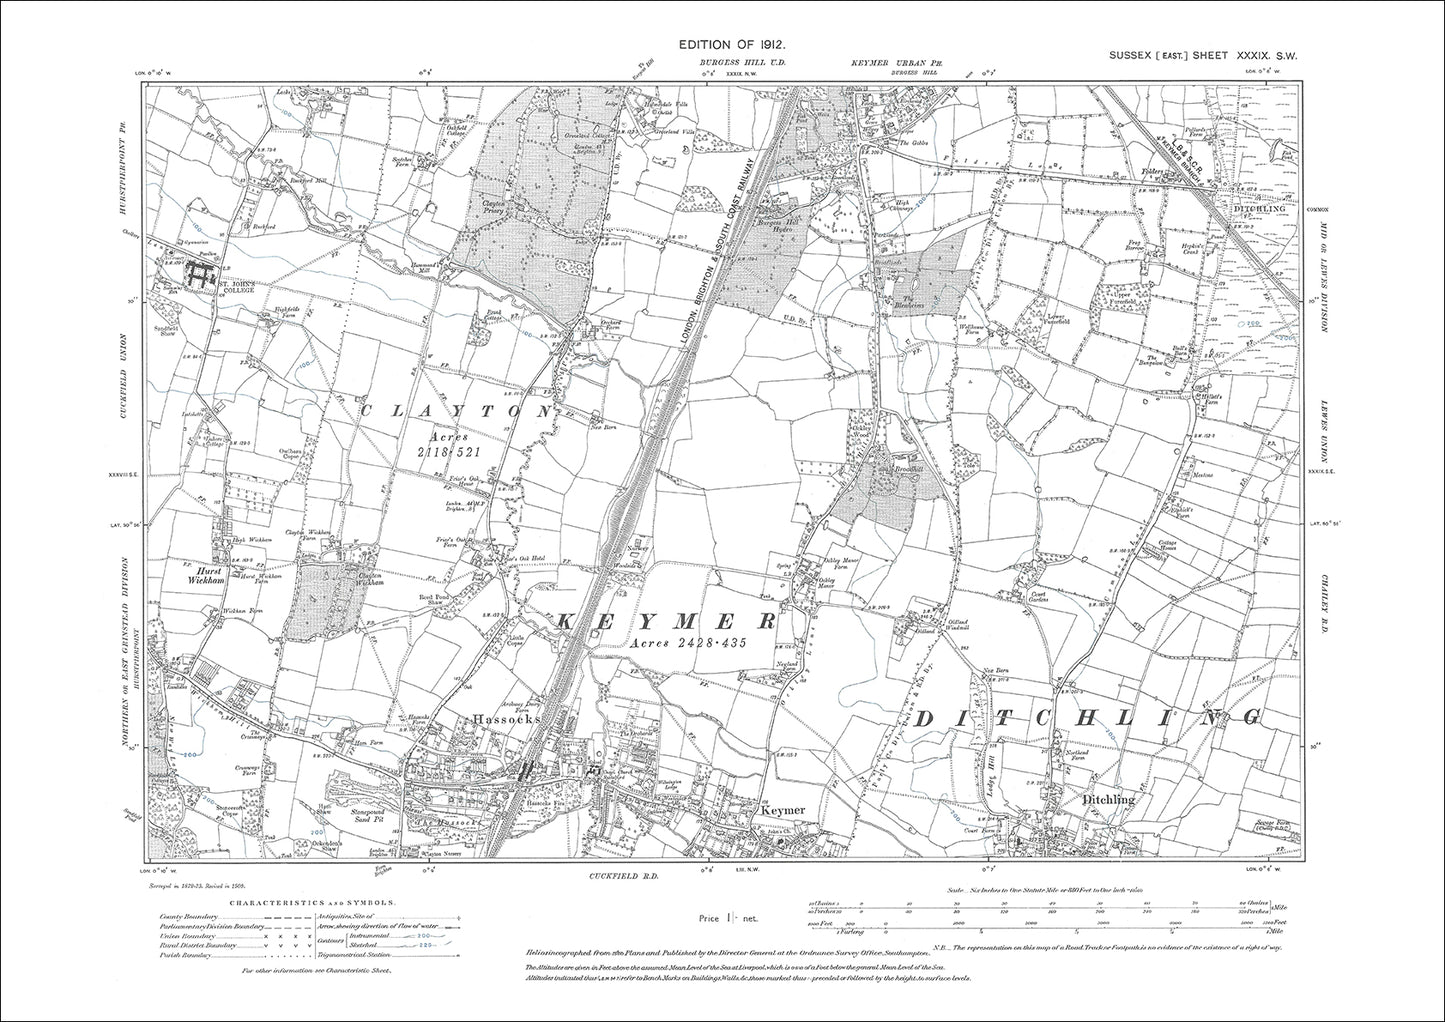 Hassocks, Keymer (north), Ditchling (north), old map Sussex 1912: 39SW